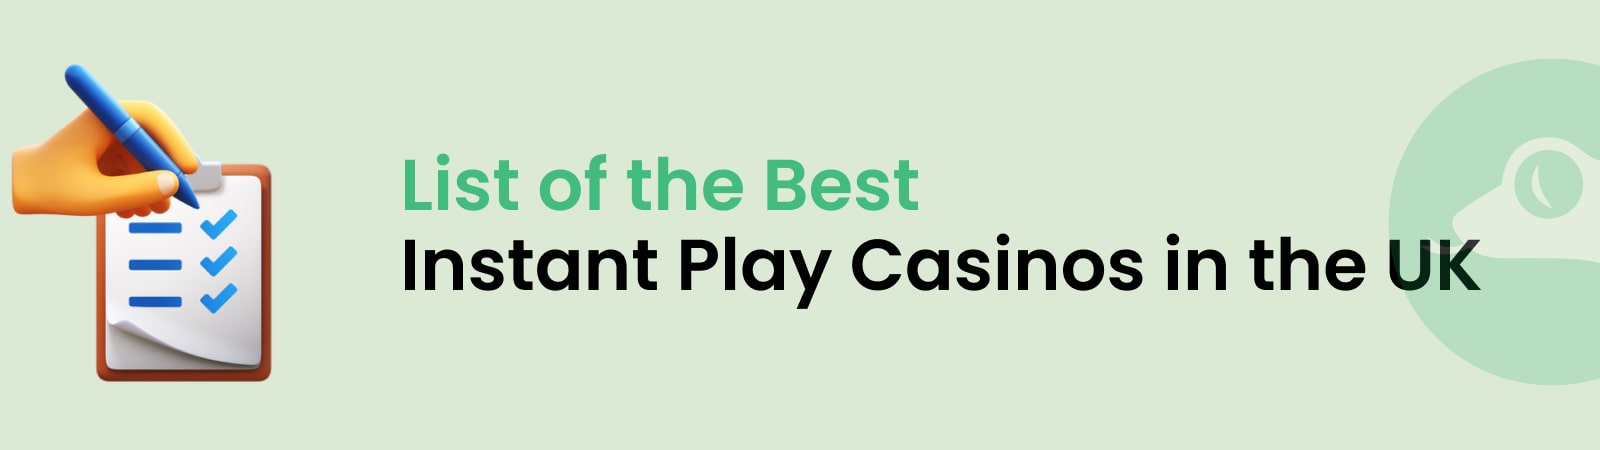 list of the best instant play casinos uk